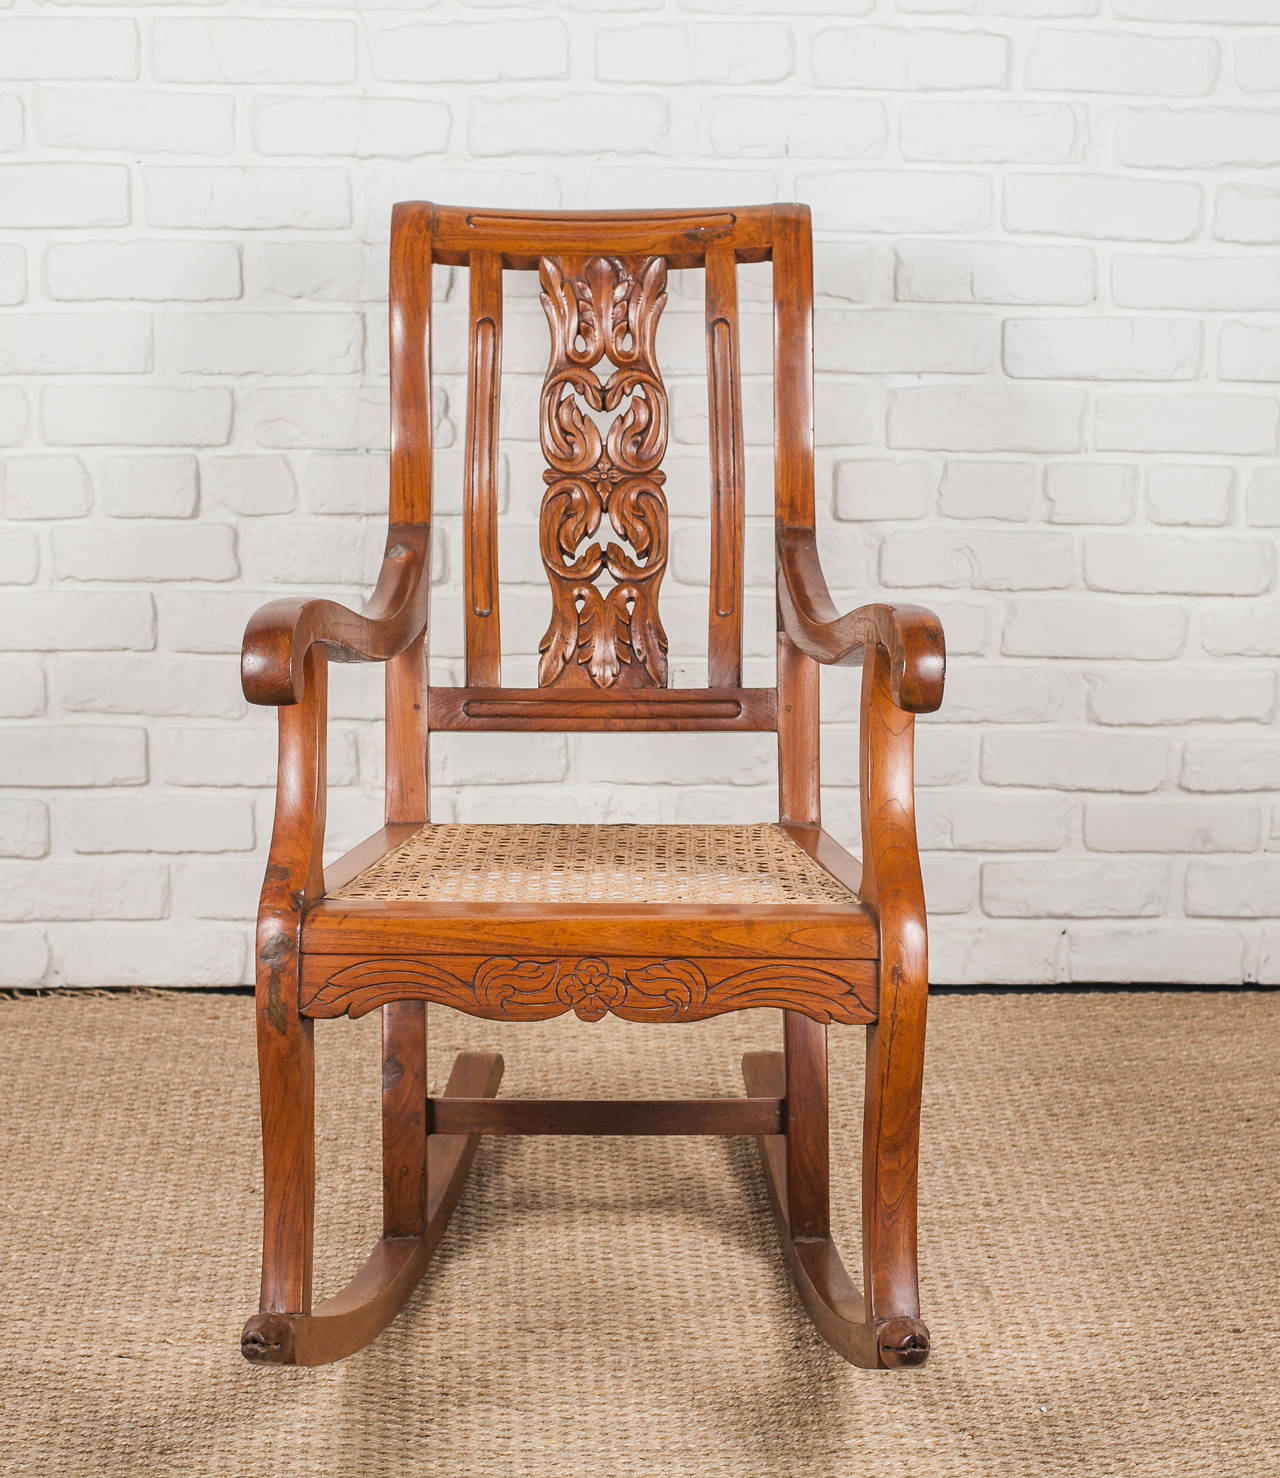 19th Century Indo-Portuguese Teak Rocking Chair with Caned Seat For Sale